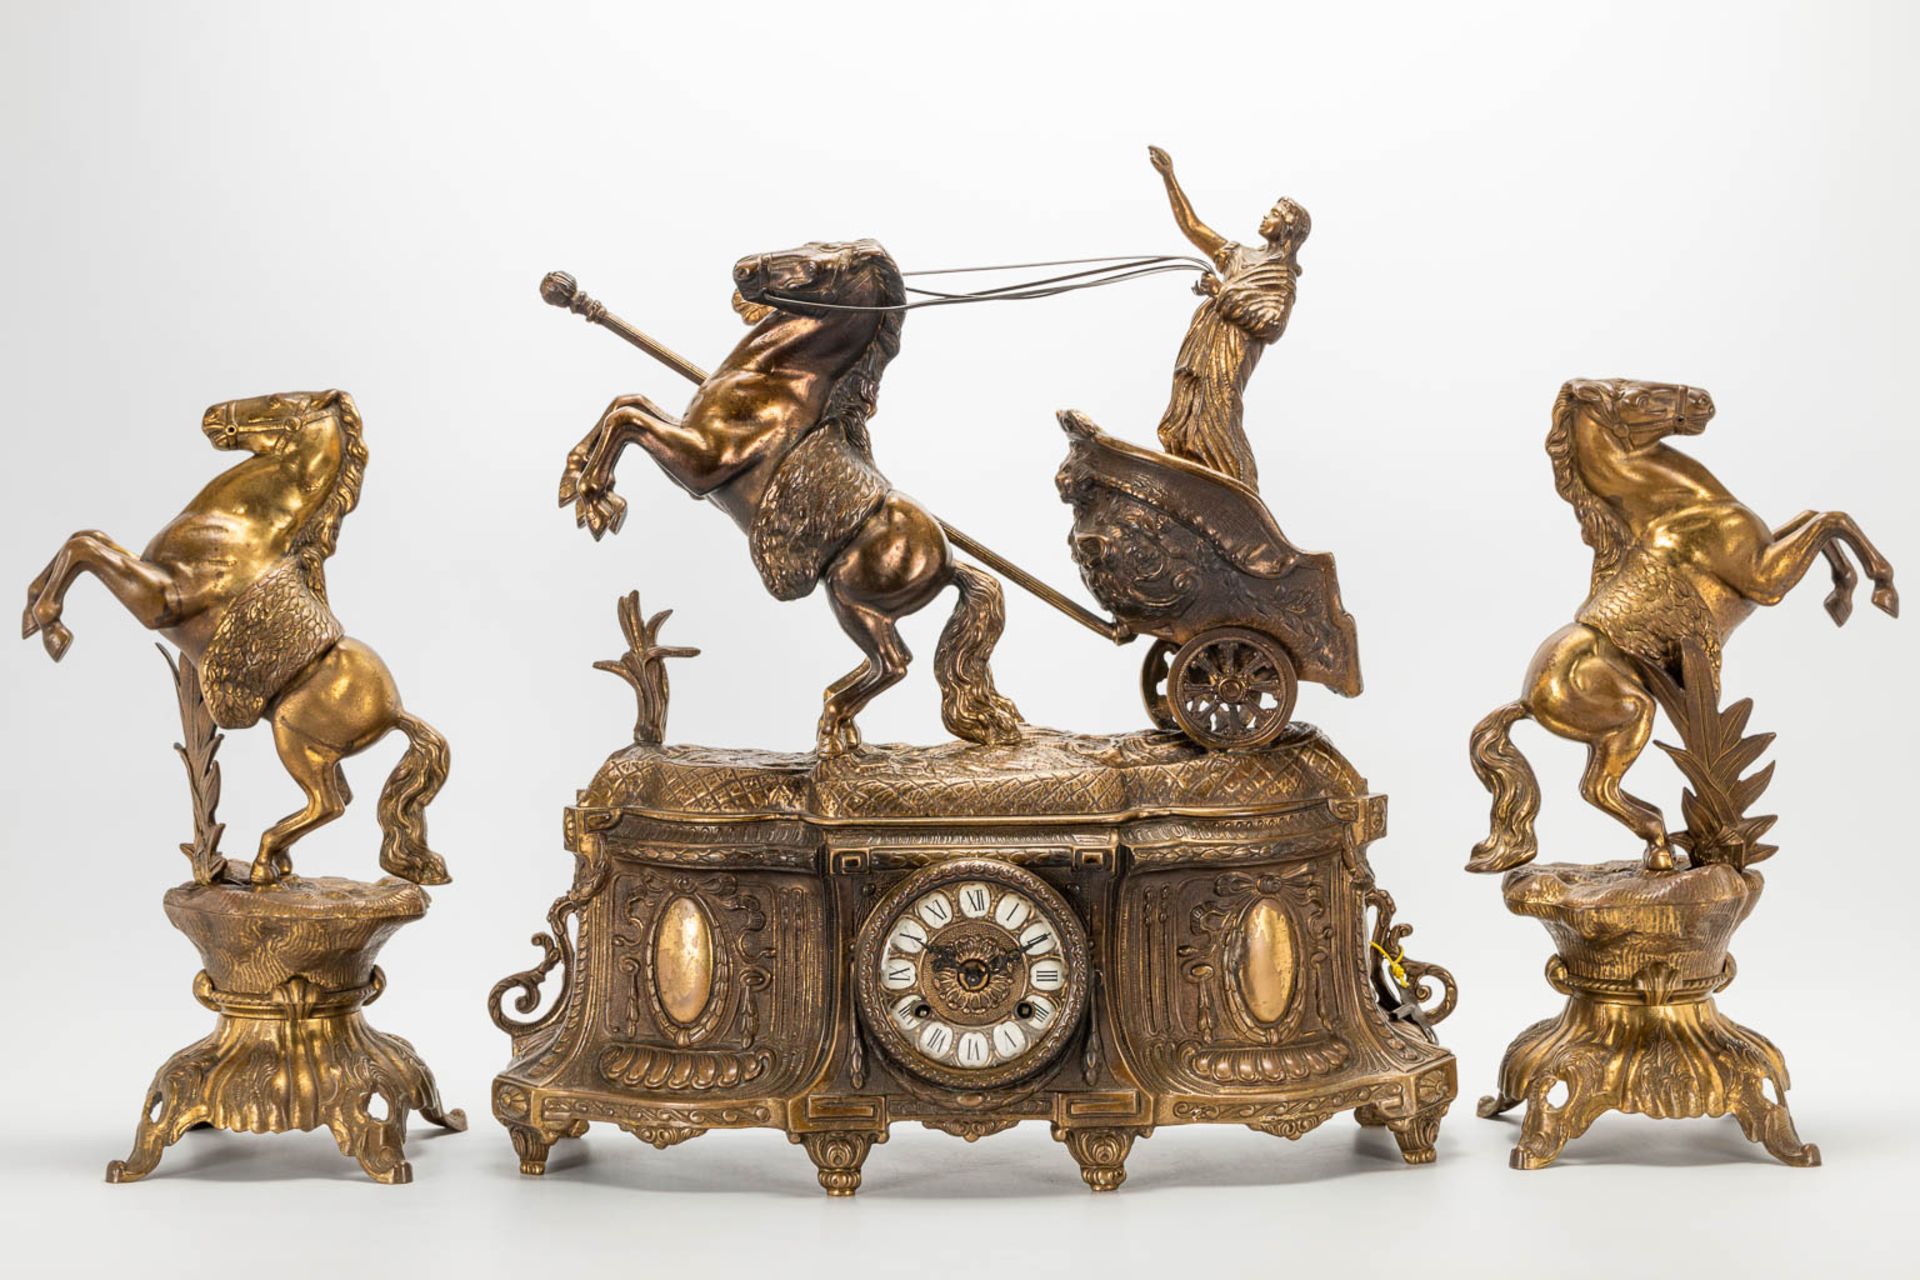 A 3 piece garniture clockset made of bronze, consisting of a clock with battle cart and 2 side piece - Image 11 of 18